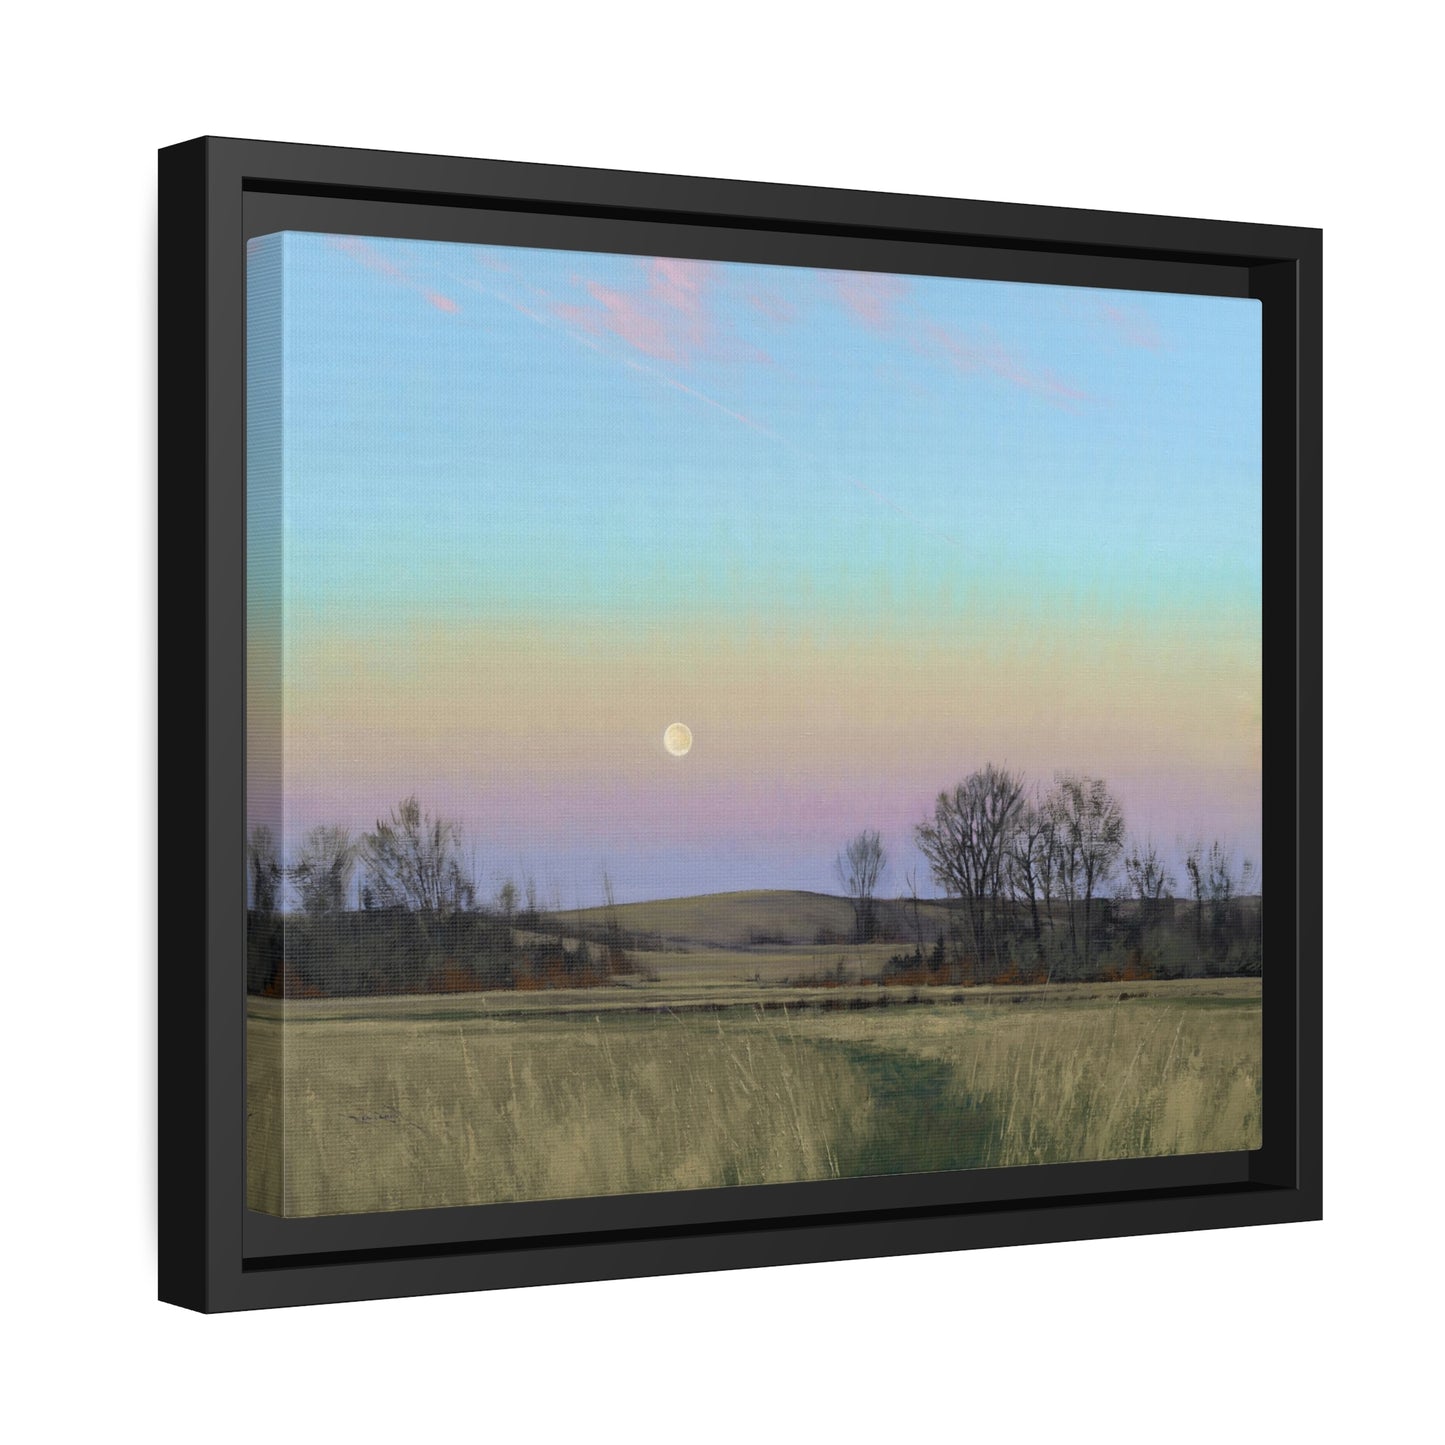 Ben Bauer: "Minnesota Glacial Lakes Area at Dusk" - Framed Canvas Reproduction